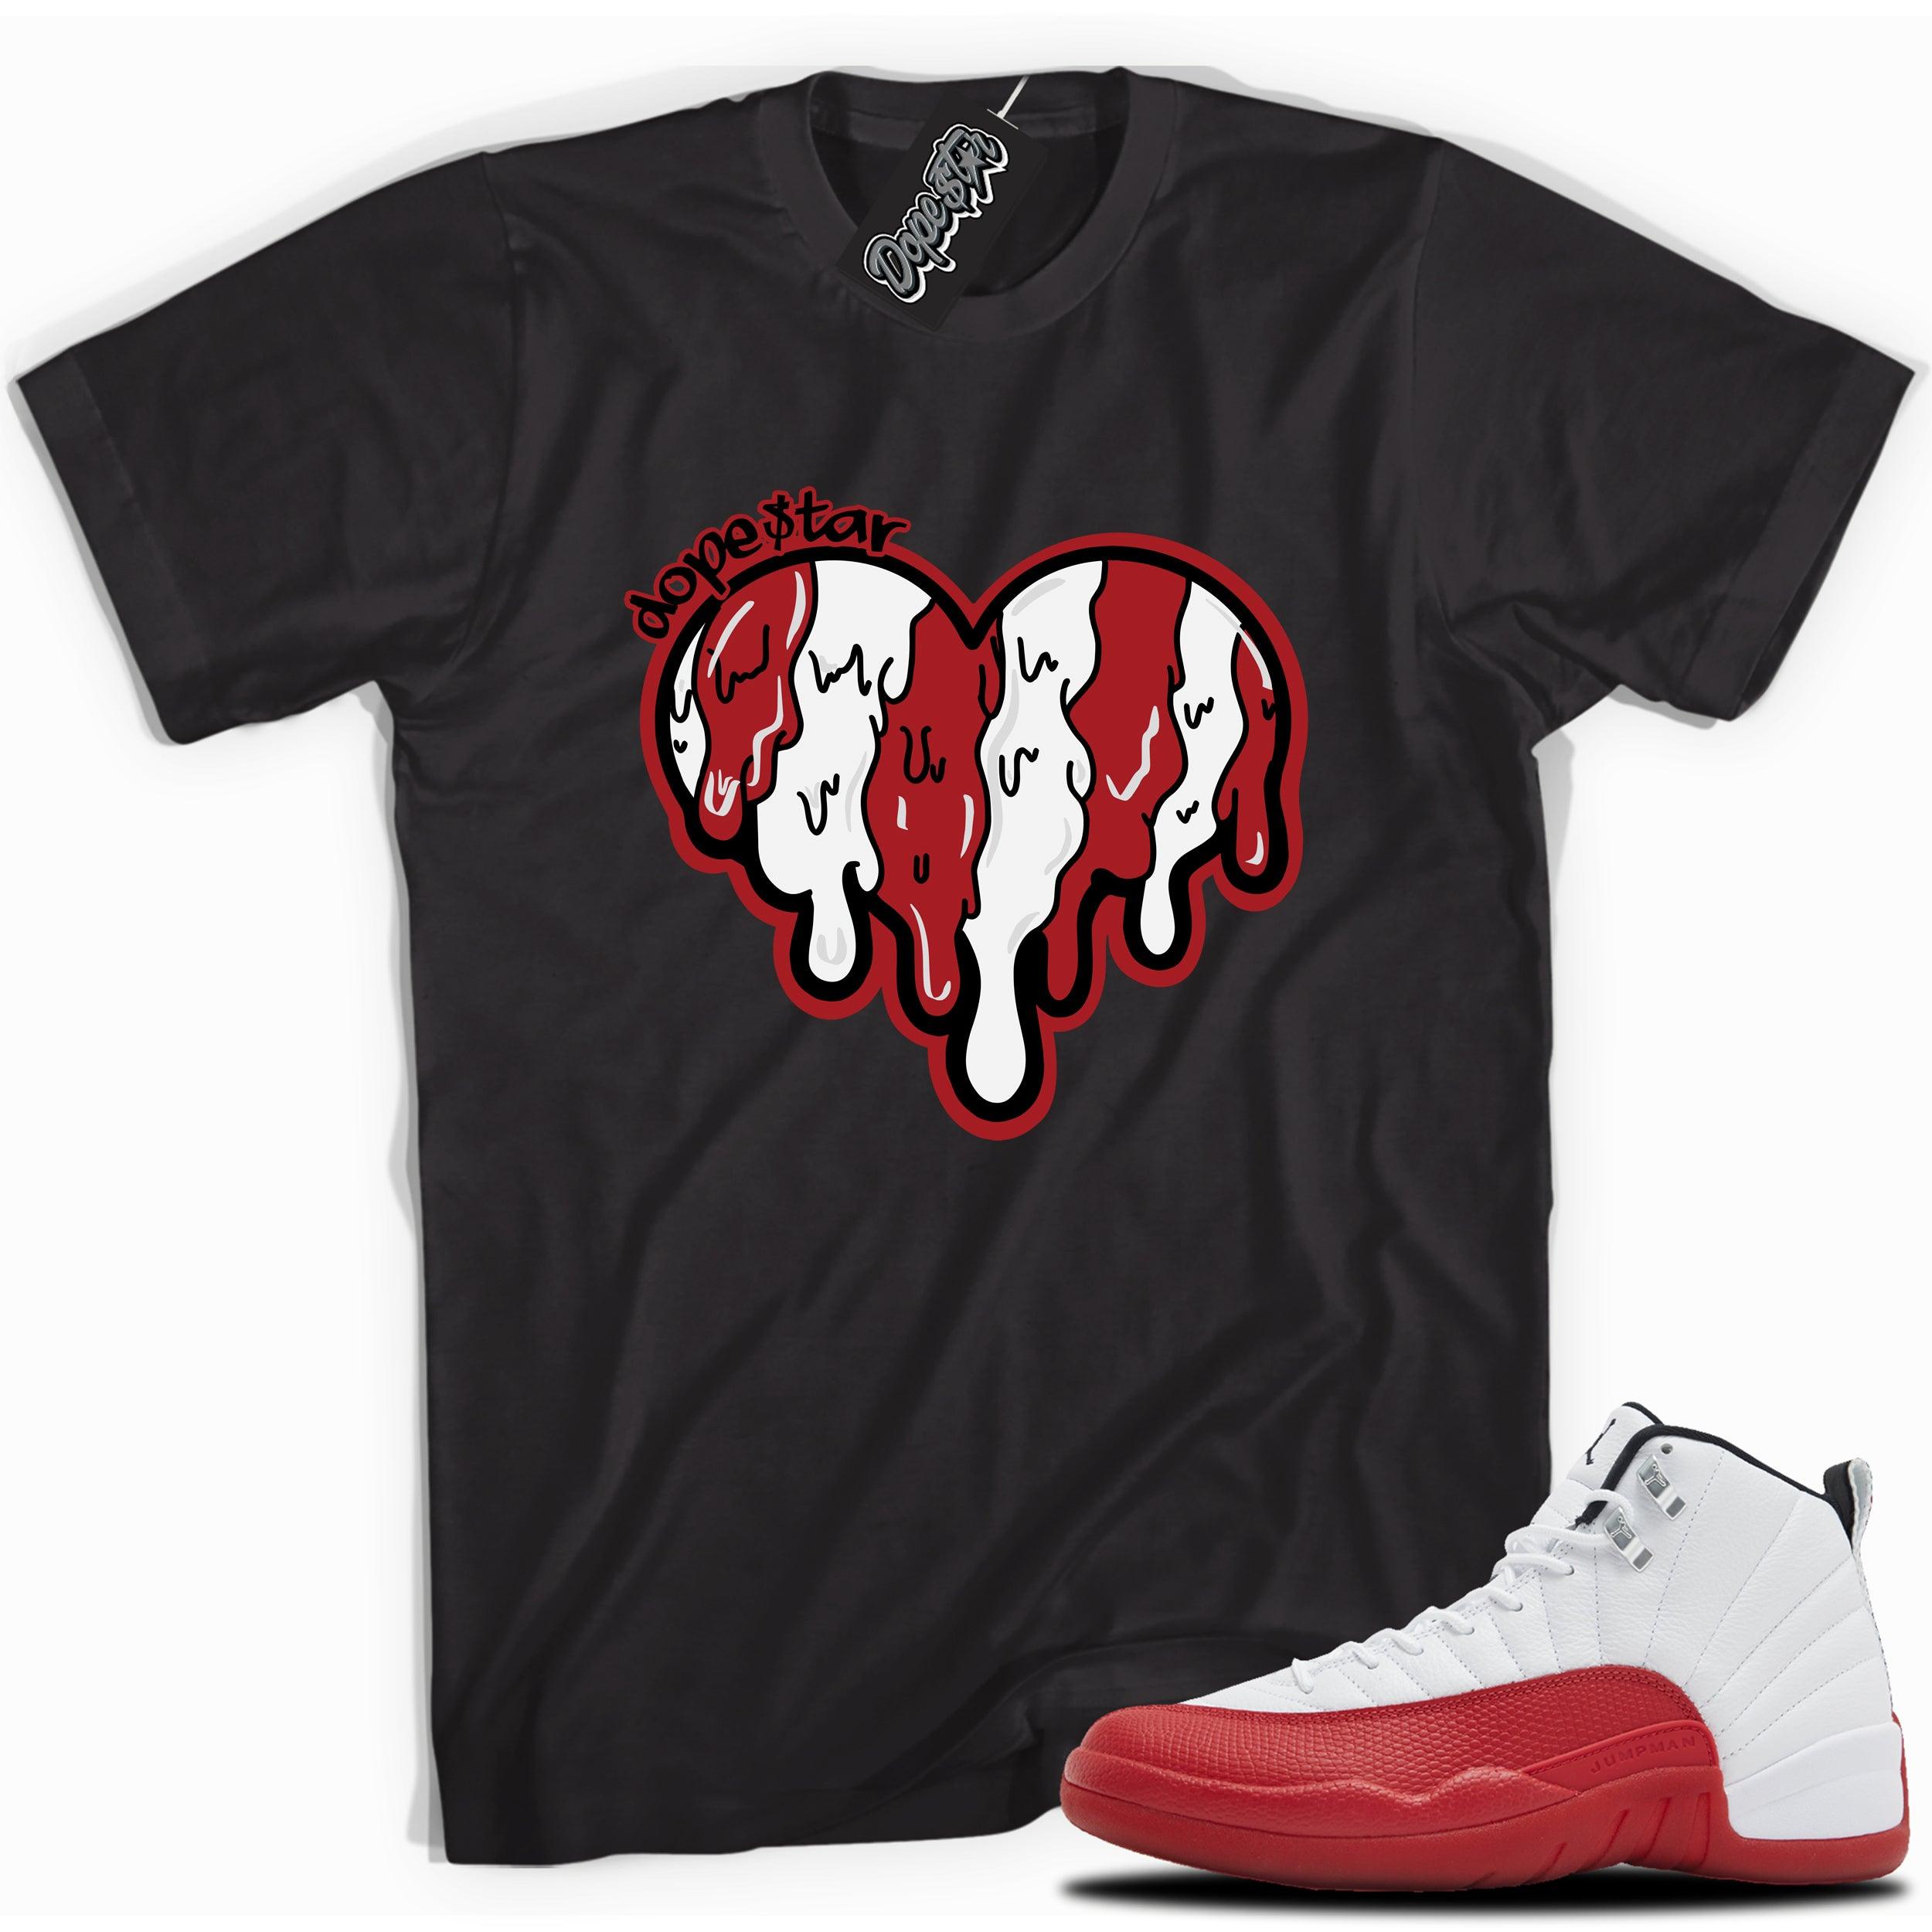 Cool Black graphic tee with “ MELTING HEART” print, that perfectly matches Air Jordan 12 Retro Cherry Red 2023 red and white sneakers 